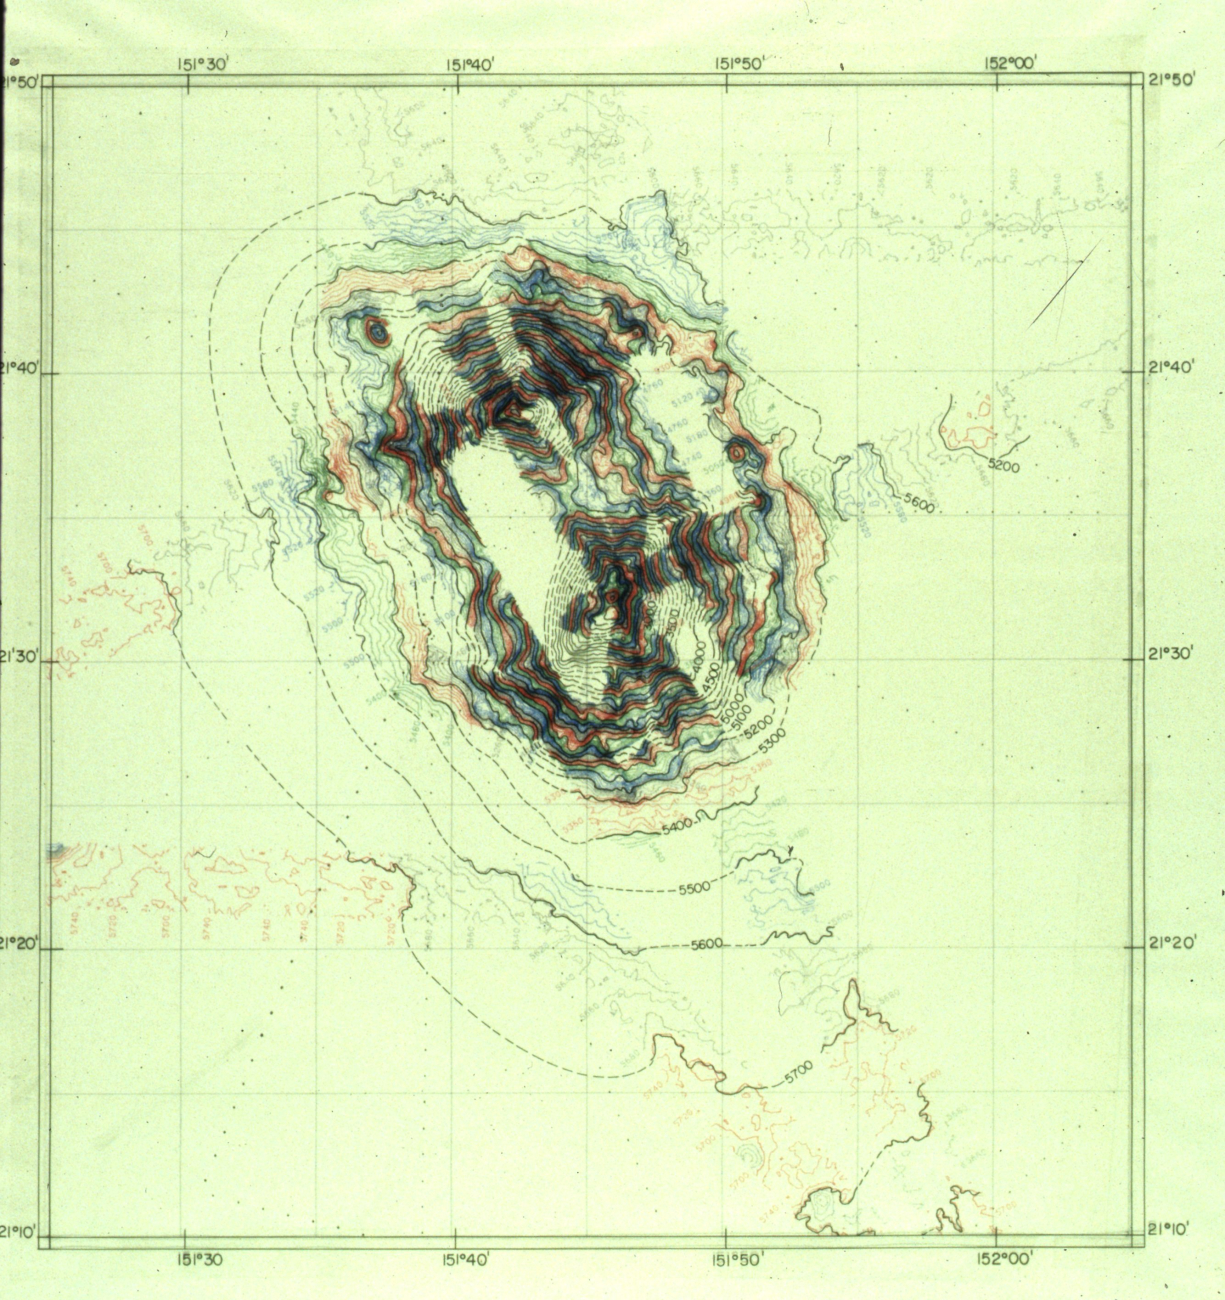 Plotted rough contour map of Seabeam data that has been georeferenced